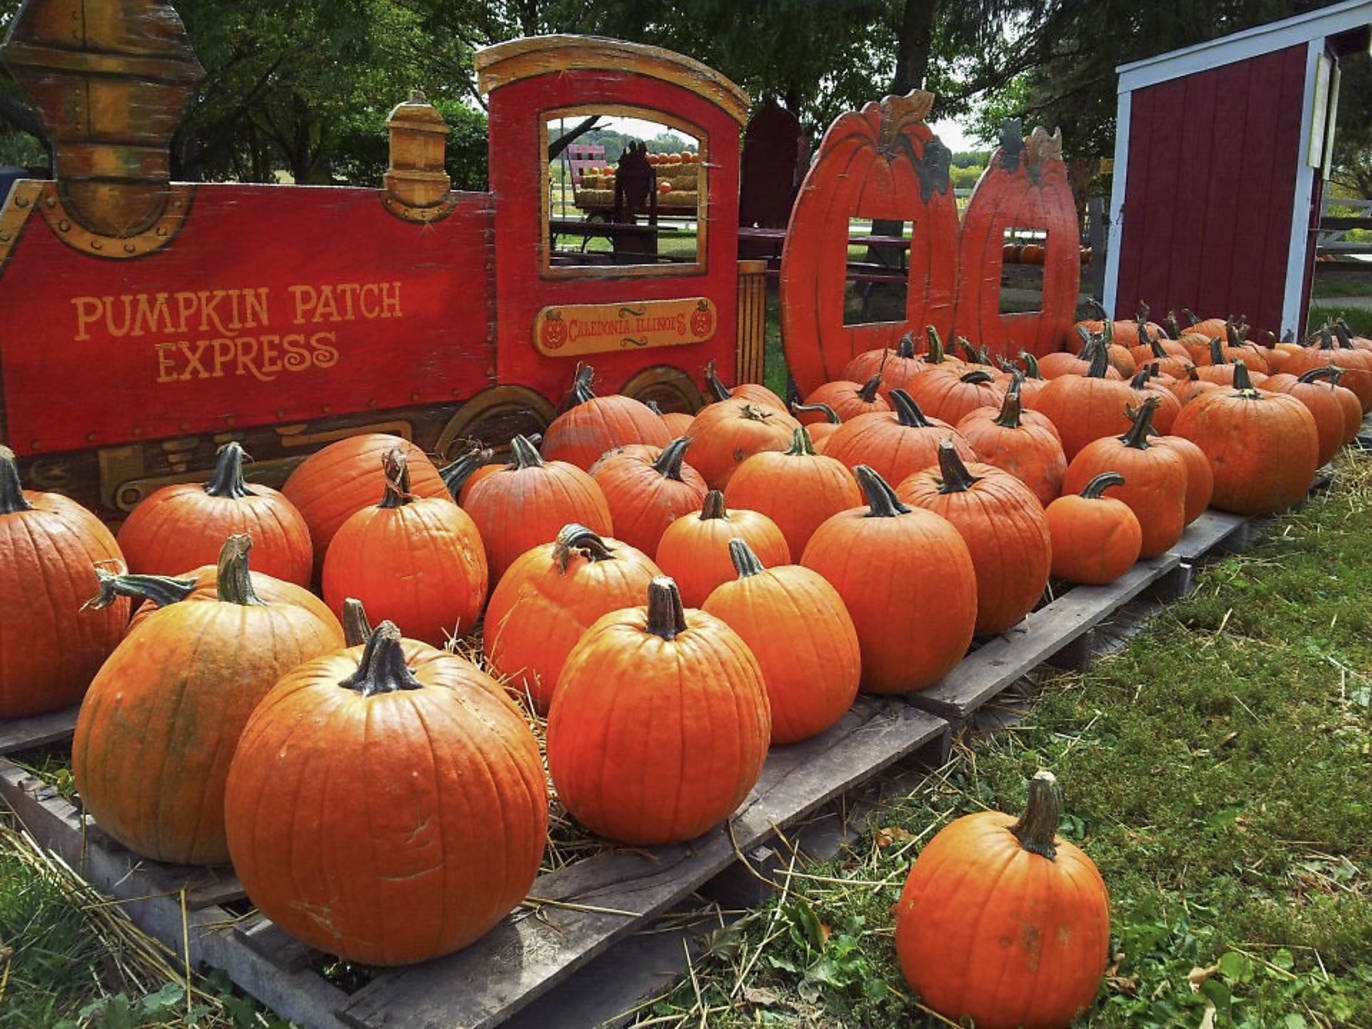 26 Pumpkin Patches Near Chicago to Visit in 2023